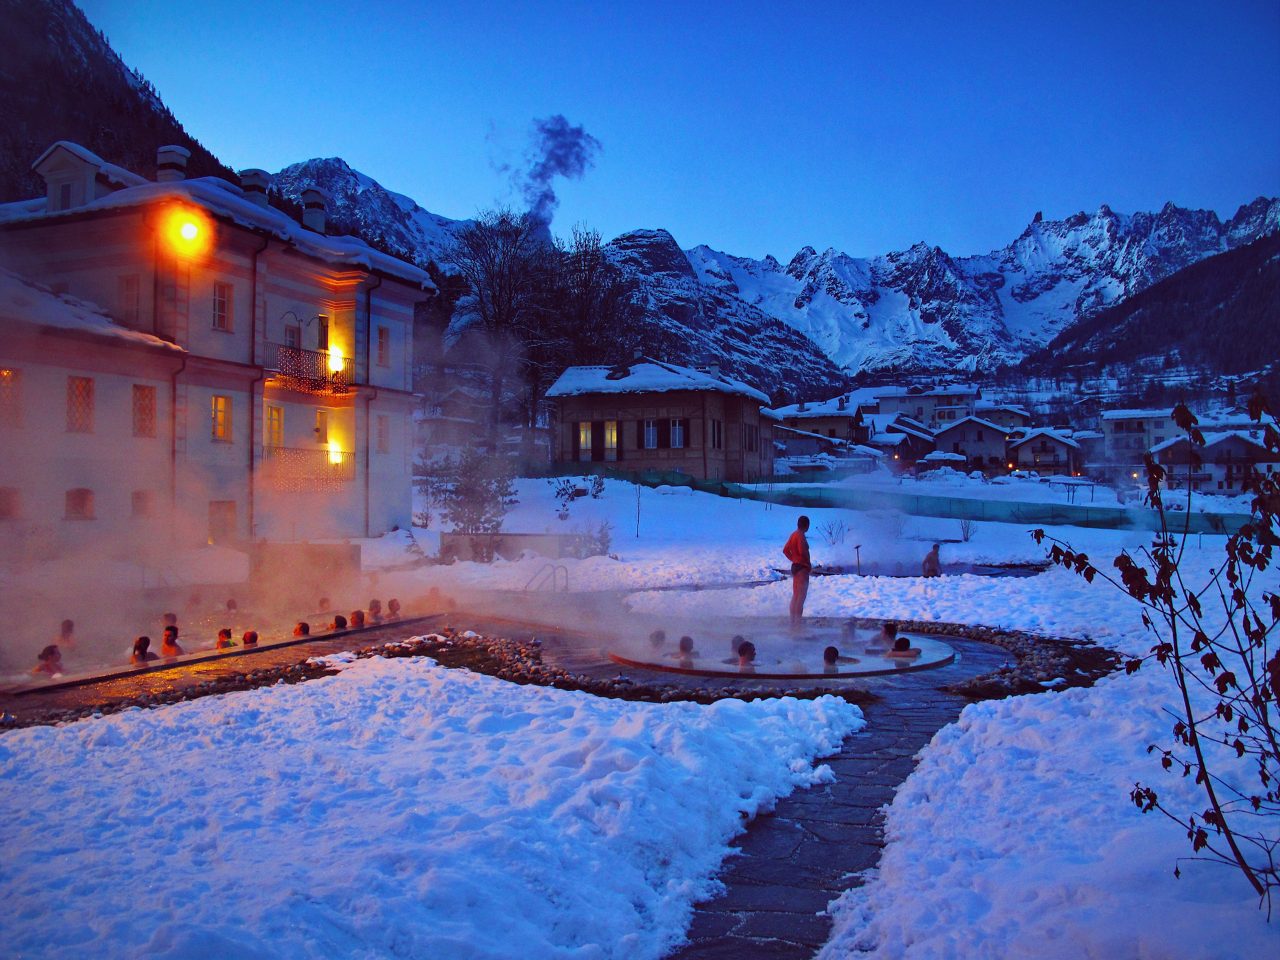 Spa resort thermal bath in hot pool in the winter, Pre Saint Didier, Italy - January 2016